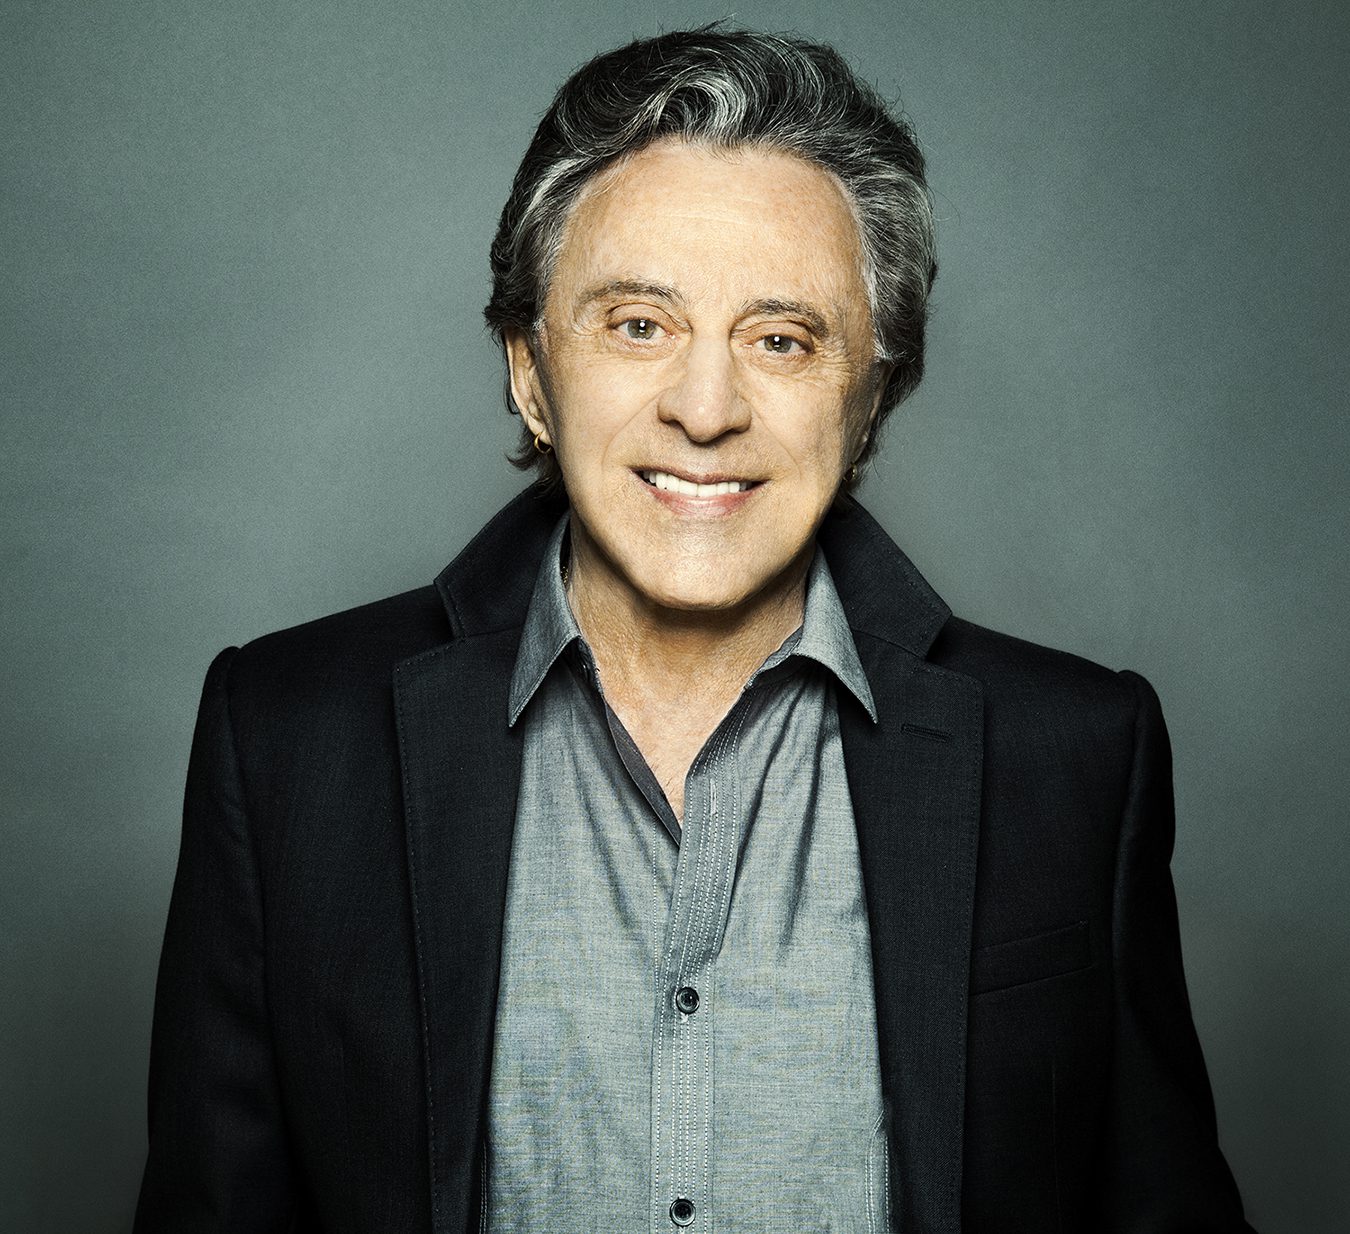 Frankie Valli and Four Seasons to play at casino